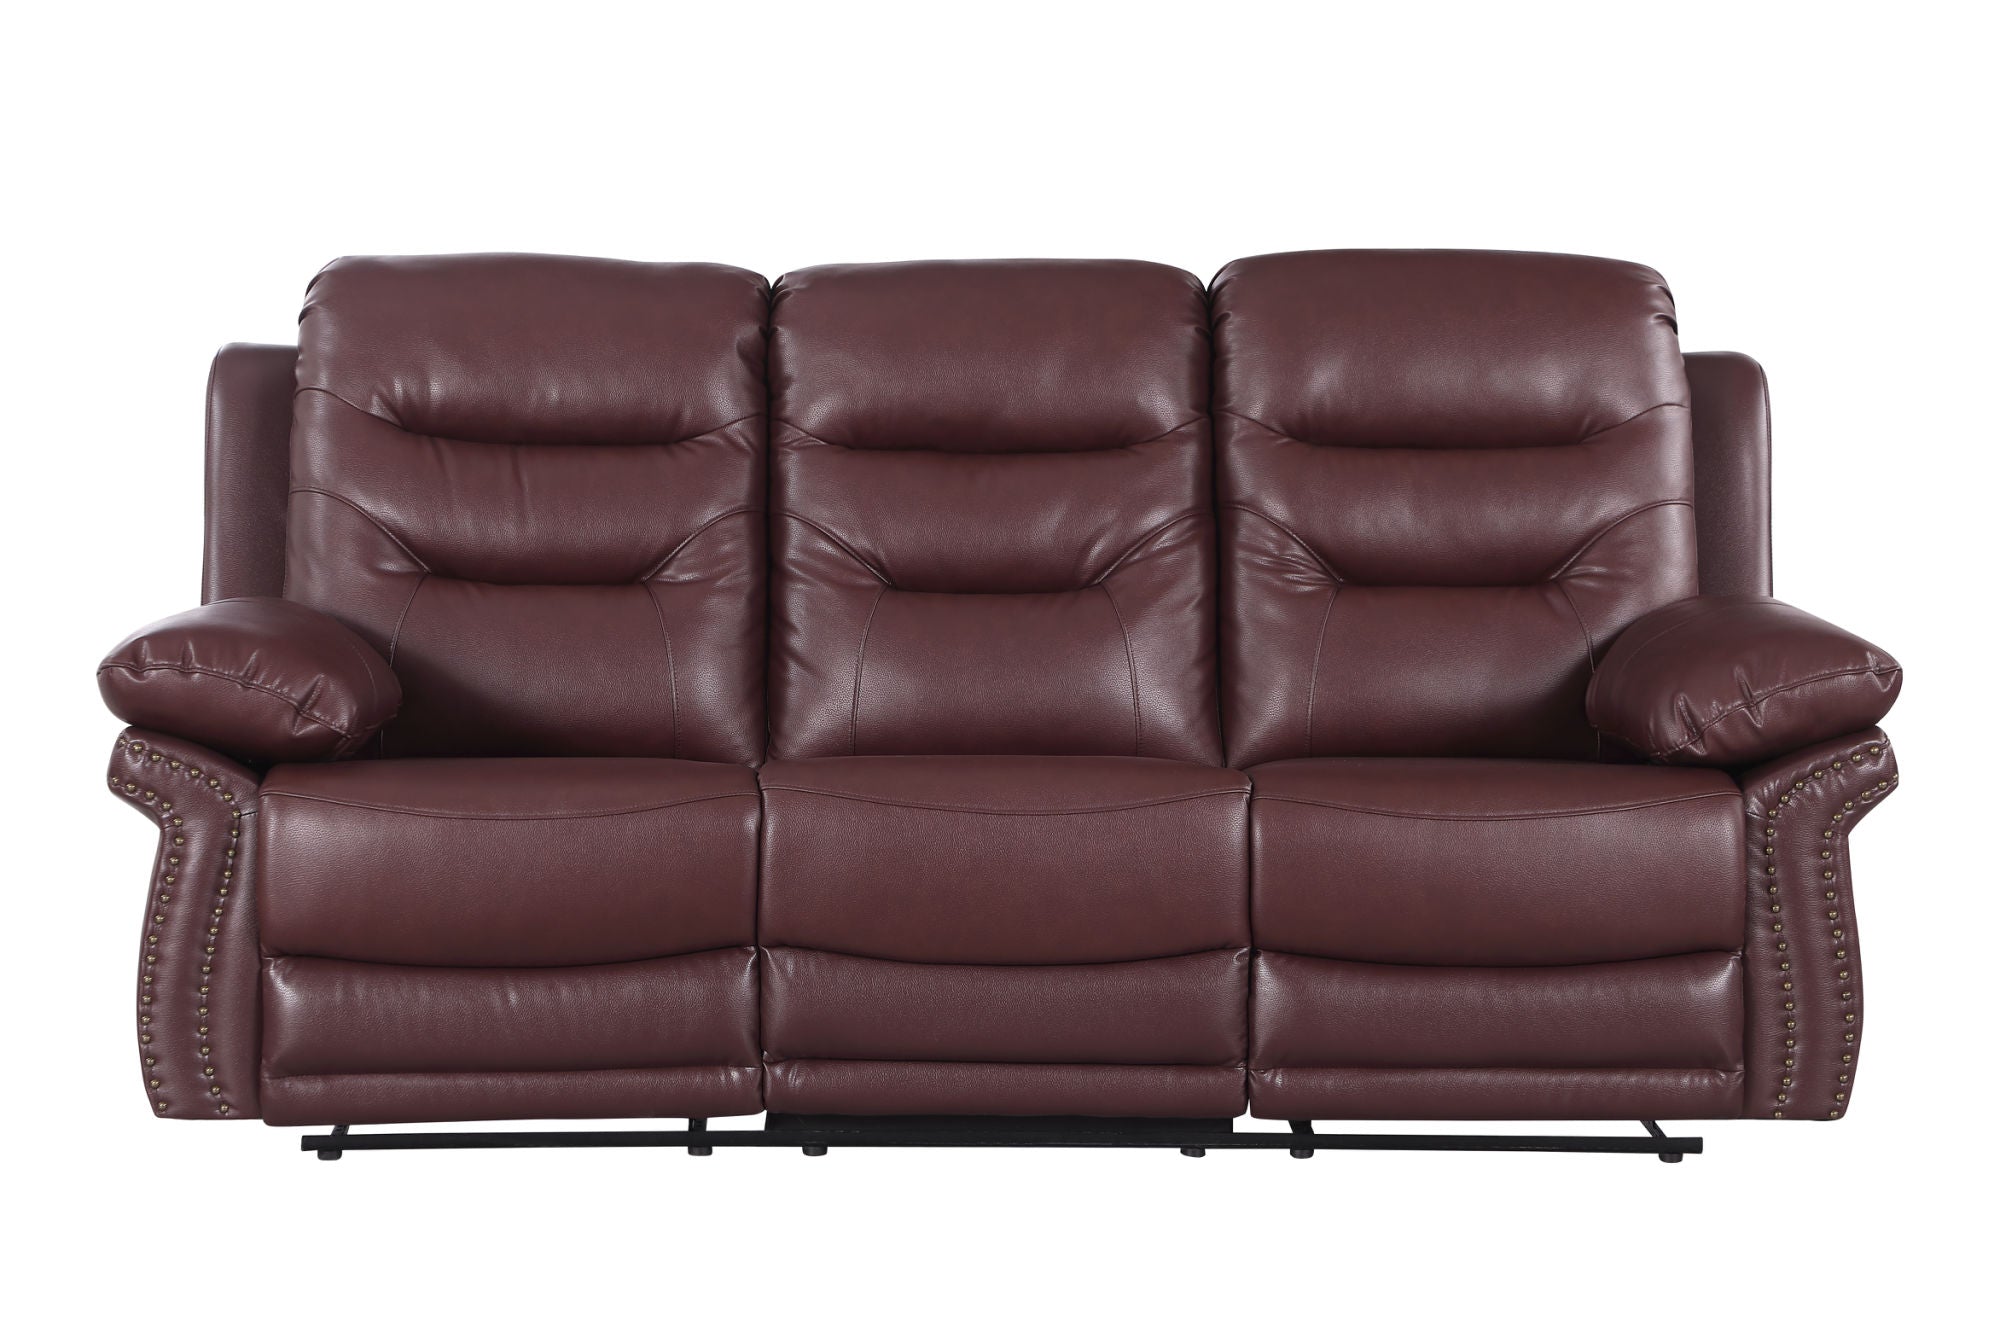 Global United Leather Air Upholstered Reclining Sofa with Fiber Back